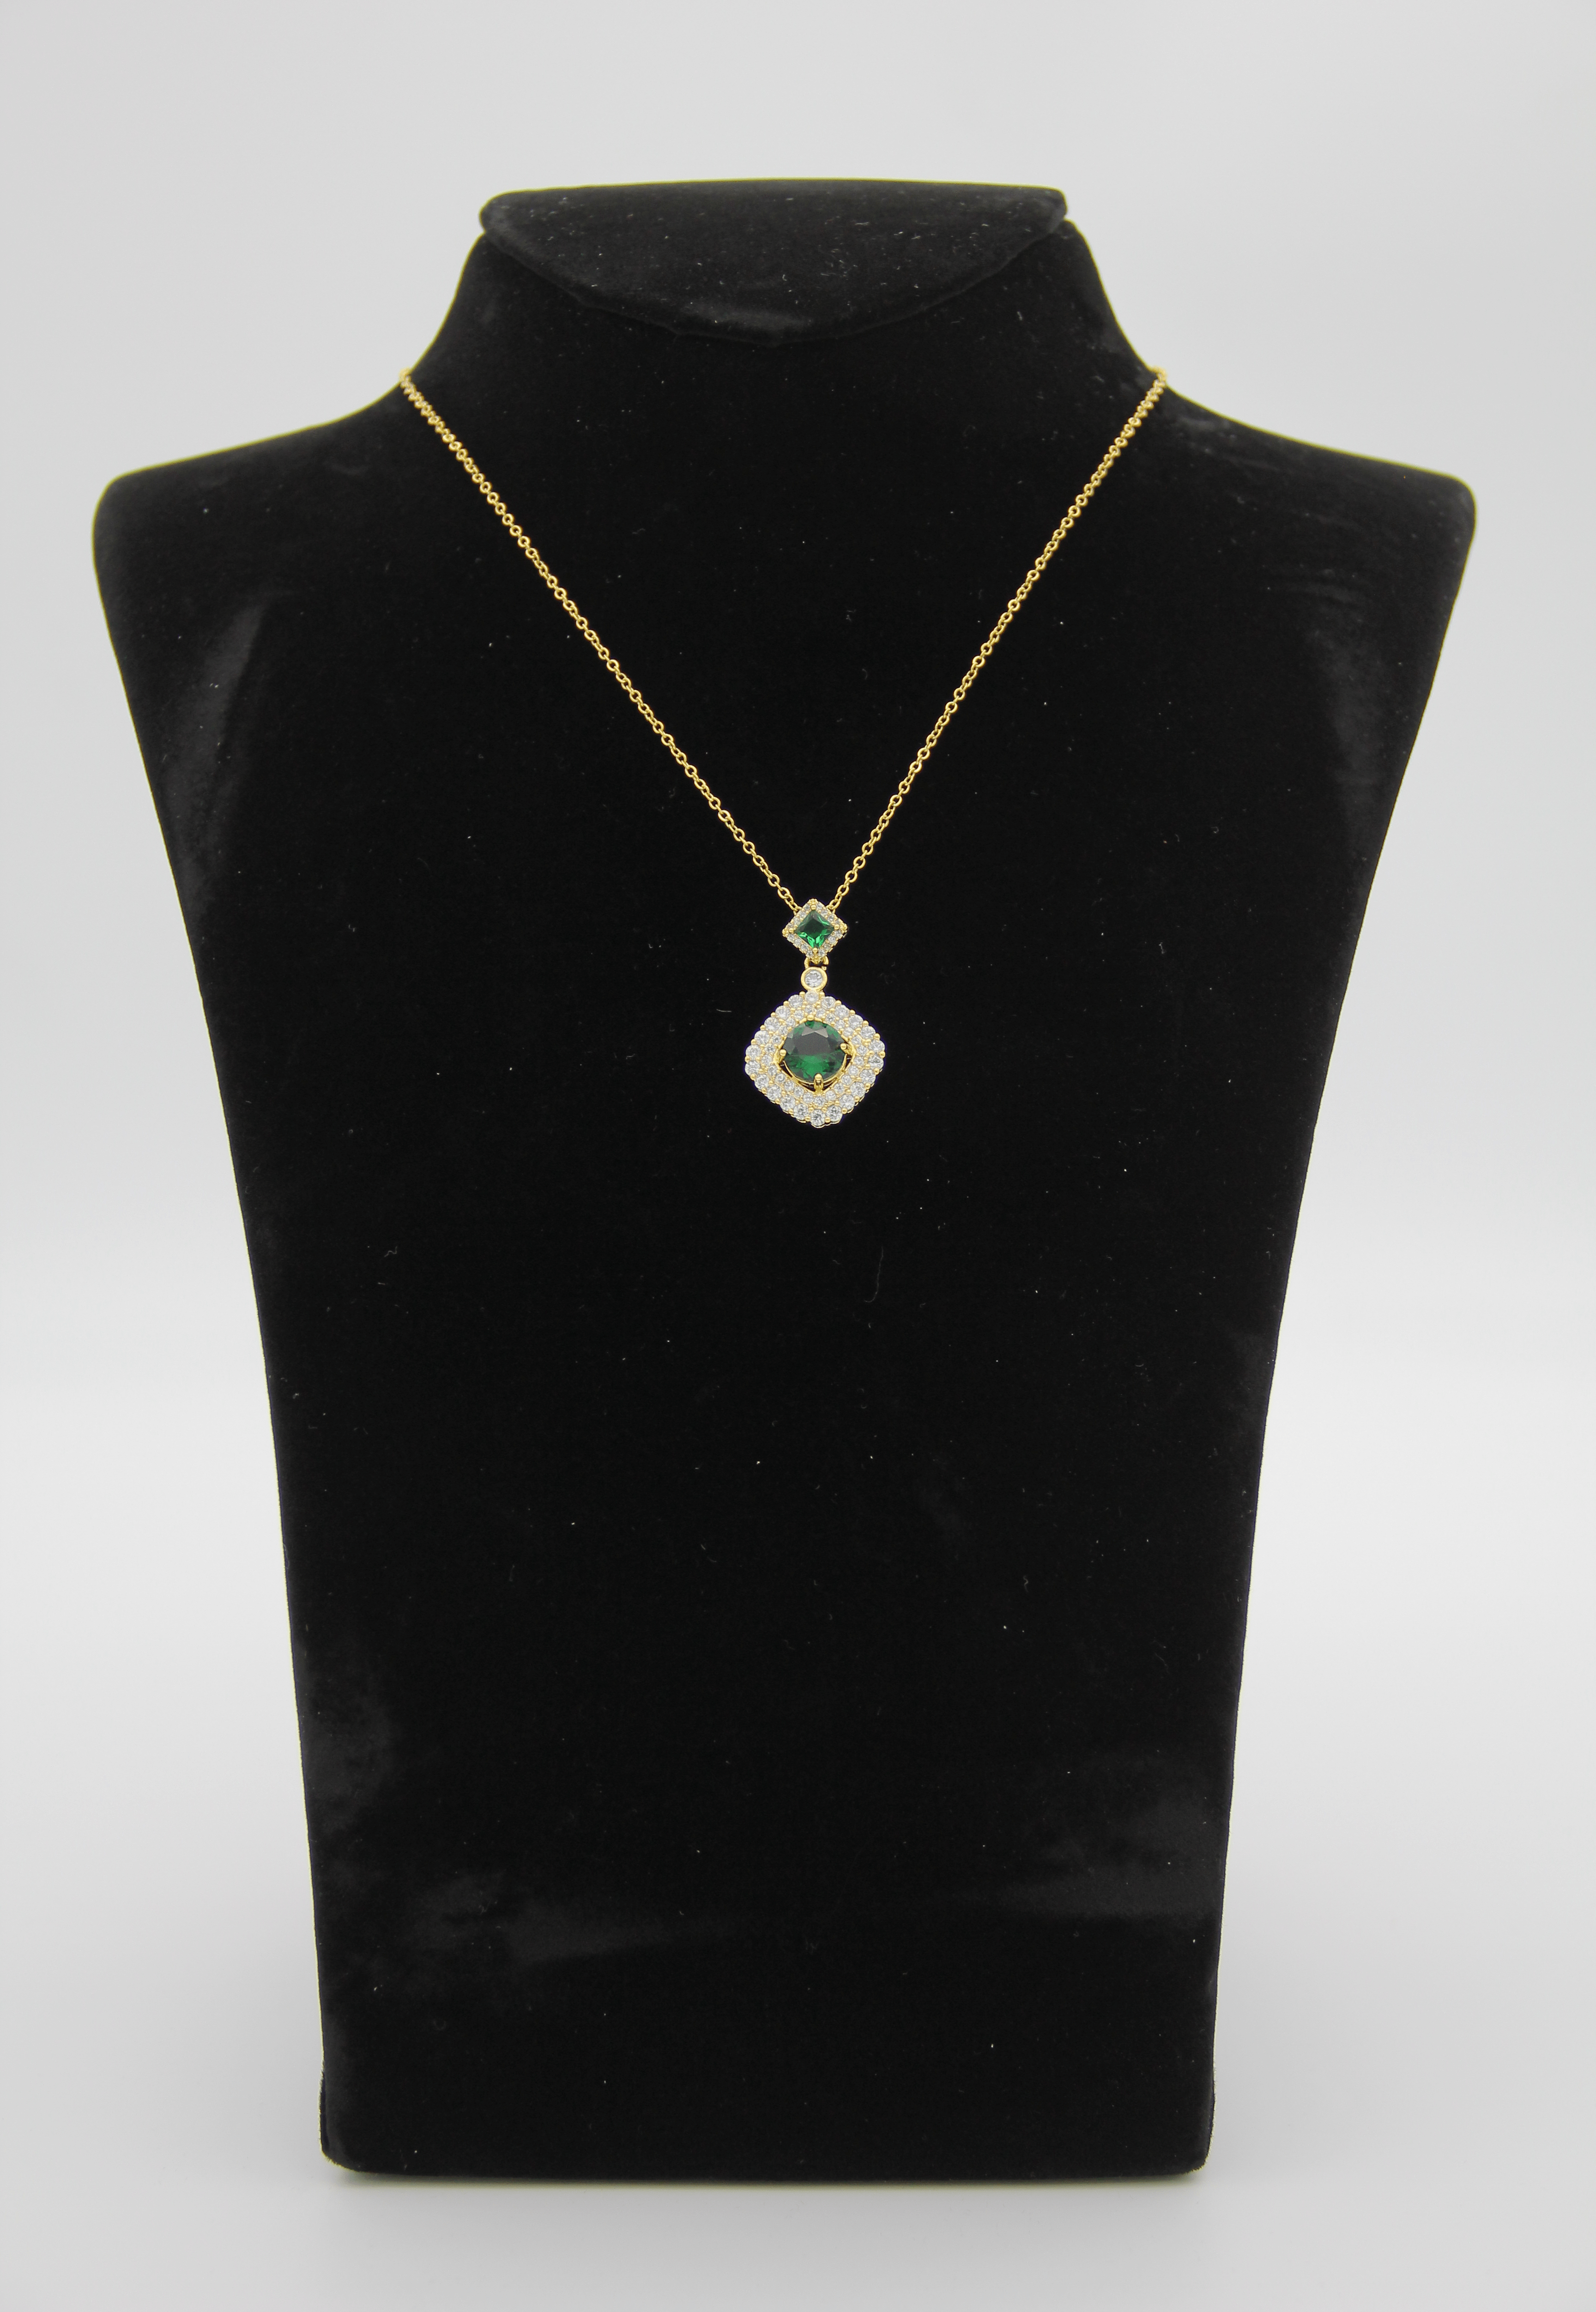 Outlet W&B Female Necklaces Short - Green Stone Pendant - Necklace